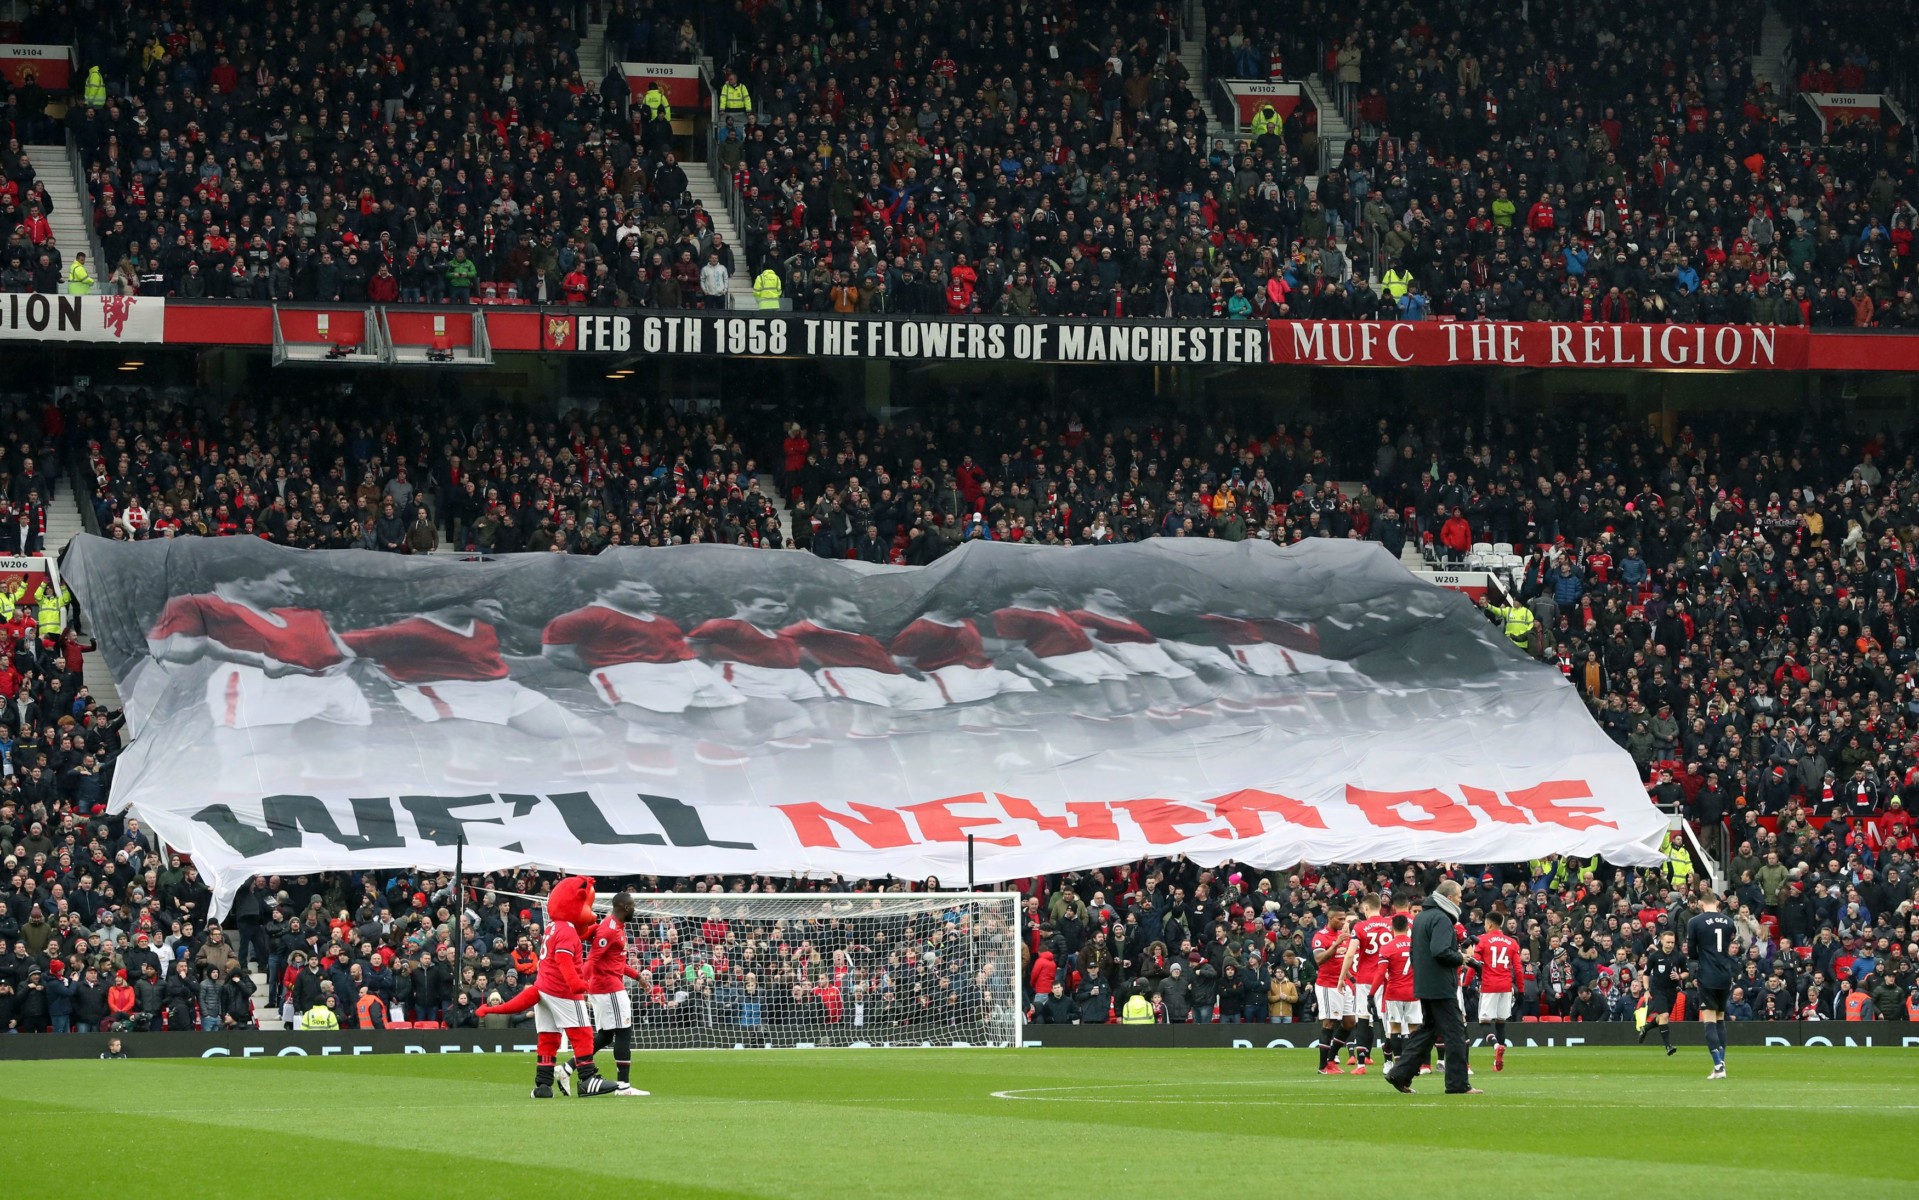 , Man Utd to extend singing section at Old Trafford to improve atmosphere as season ticket prices are frozen